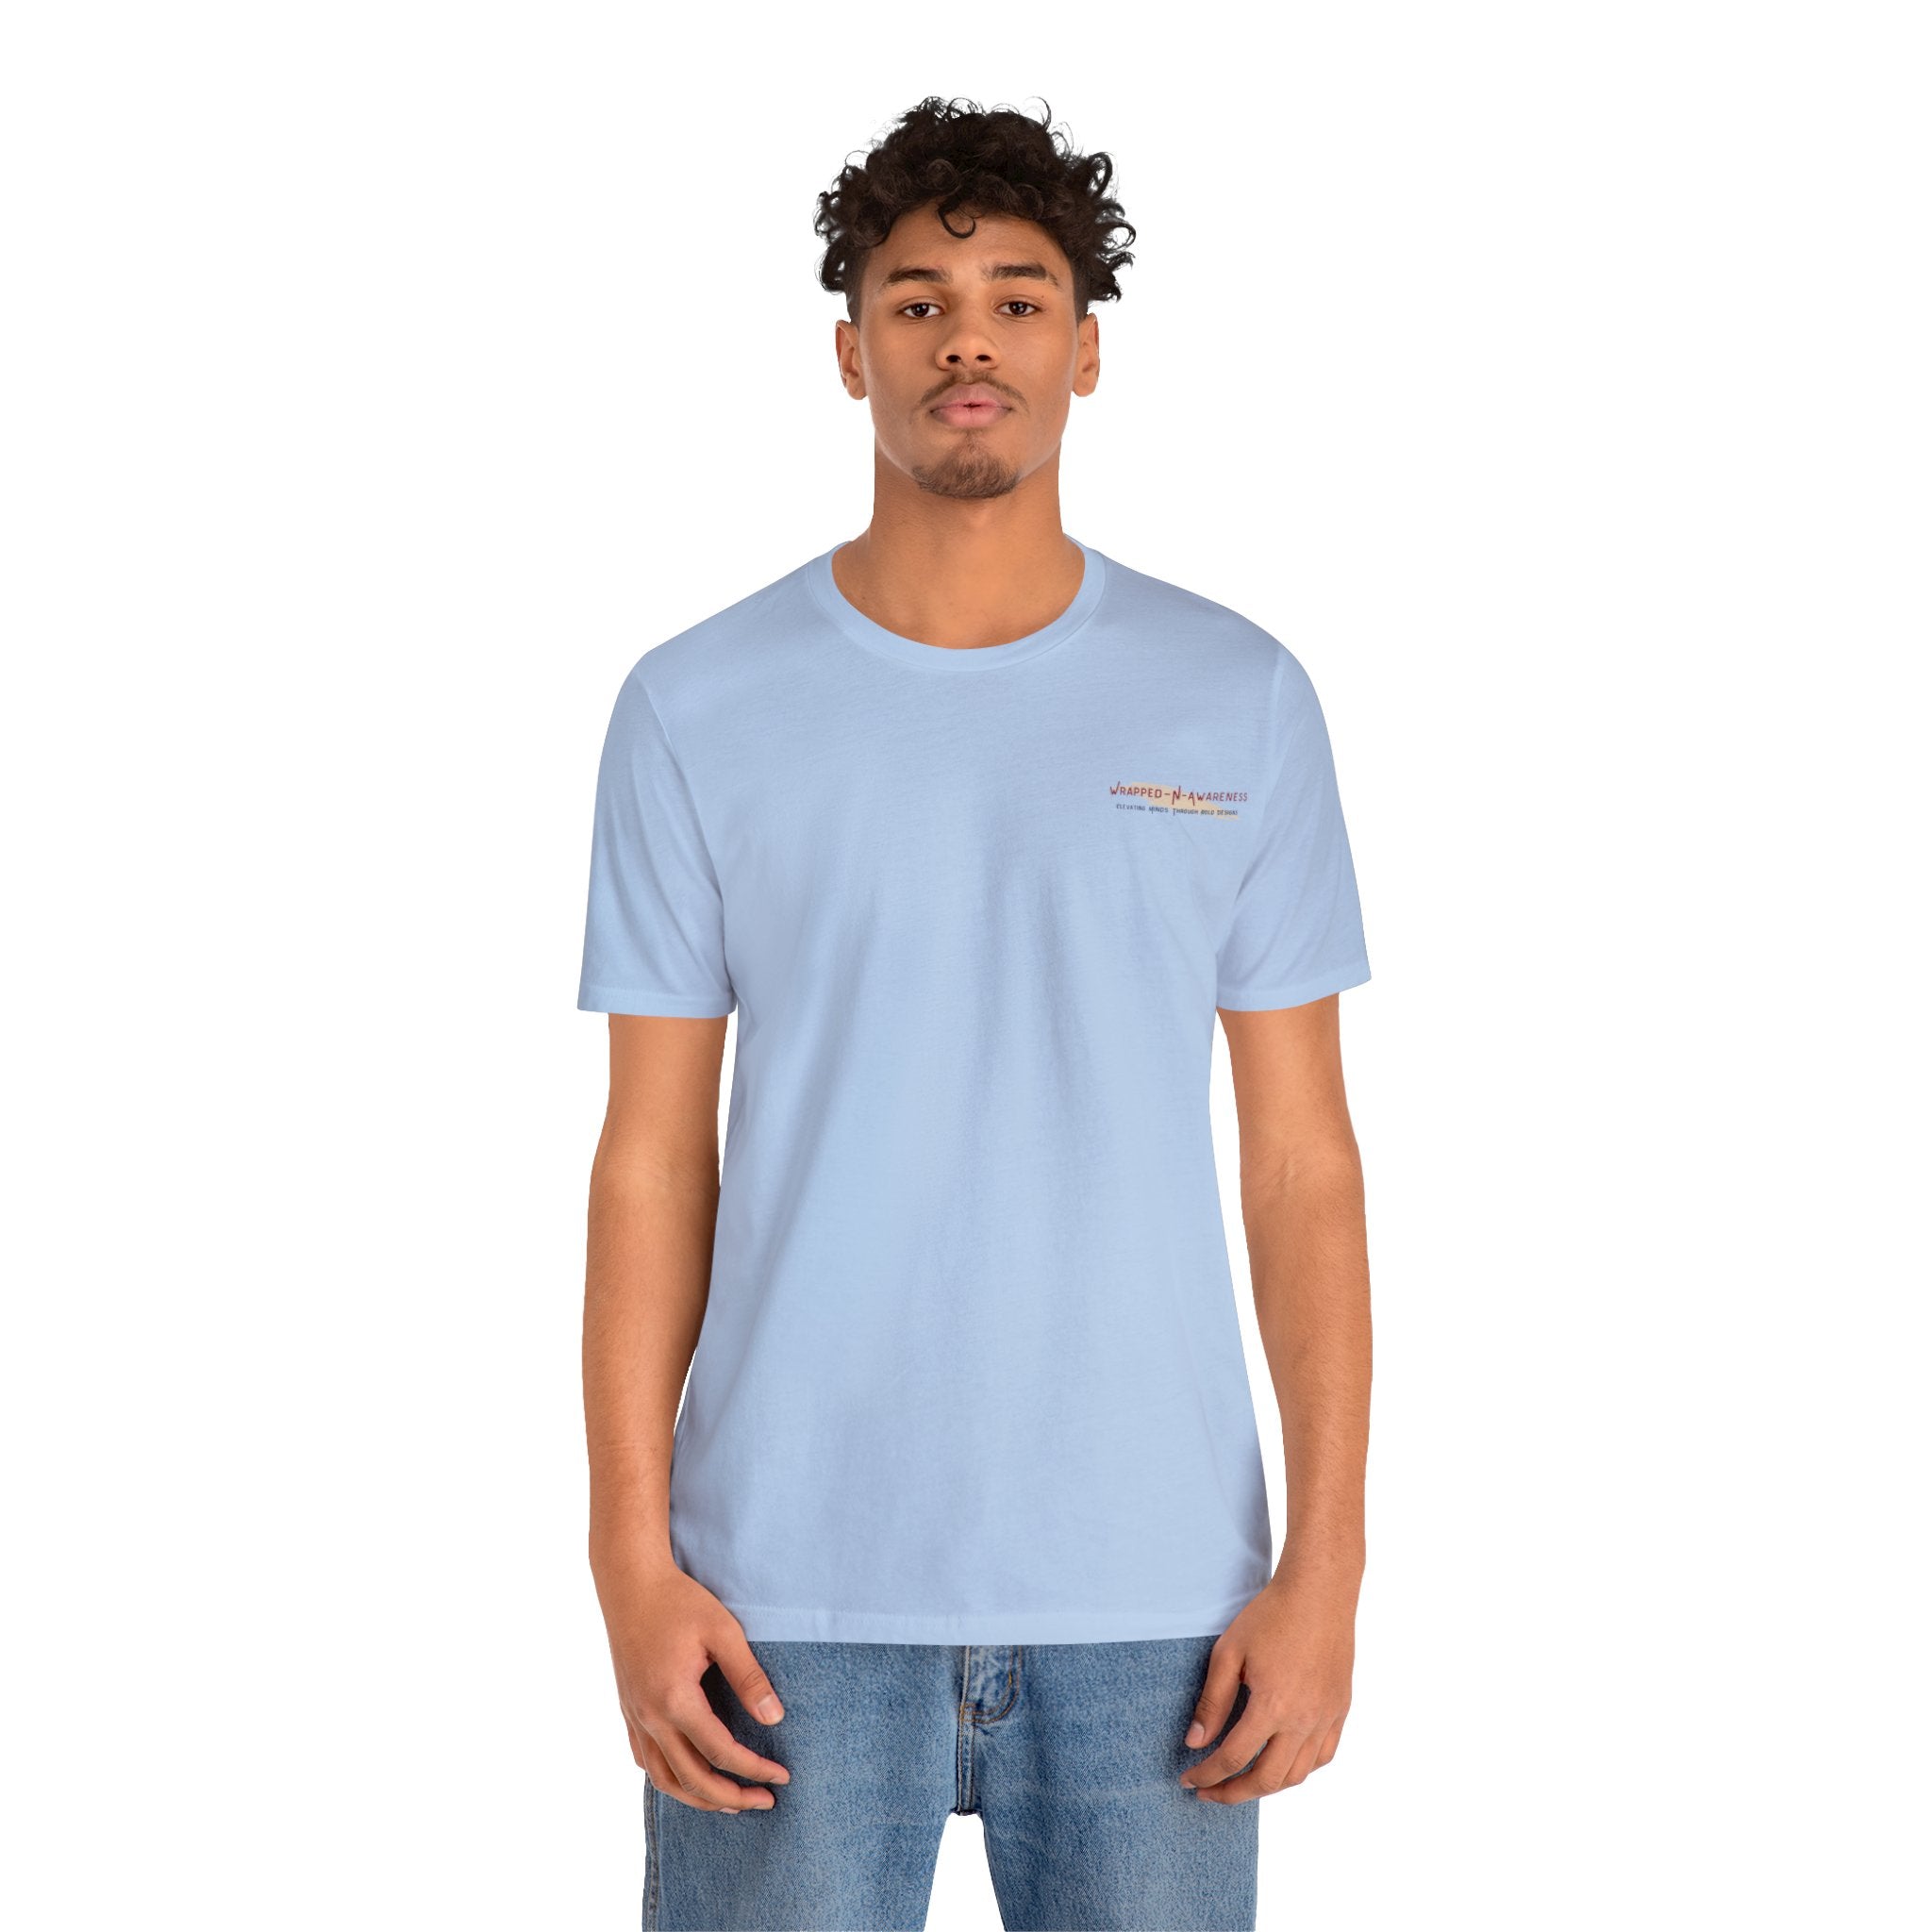 Mindfulness Heals Wounds Tee - Bella+Canvas 3001 Turquoise Airlume Cotton Bella+Canvas 3001 Crew Neckline Jersey Short Sleeve Lightweight Fabric Mental Health Support Retail Fit Tear-away Label Tee Unisex Tee T-Shirt 11658919472250272146_2048 Printify